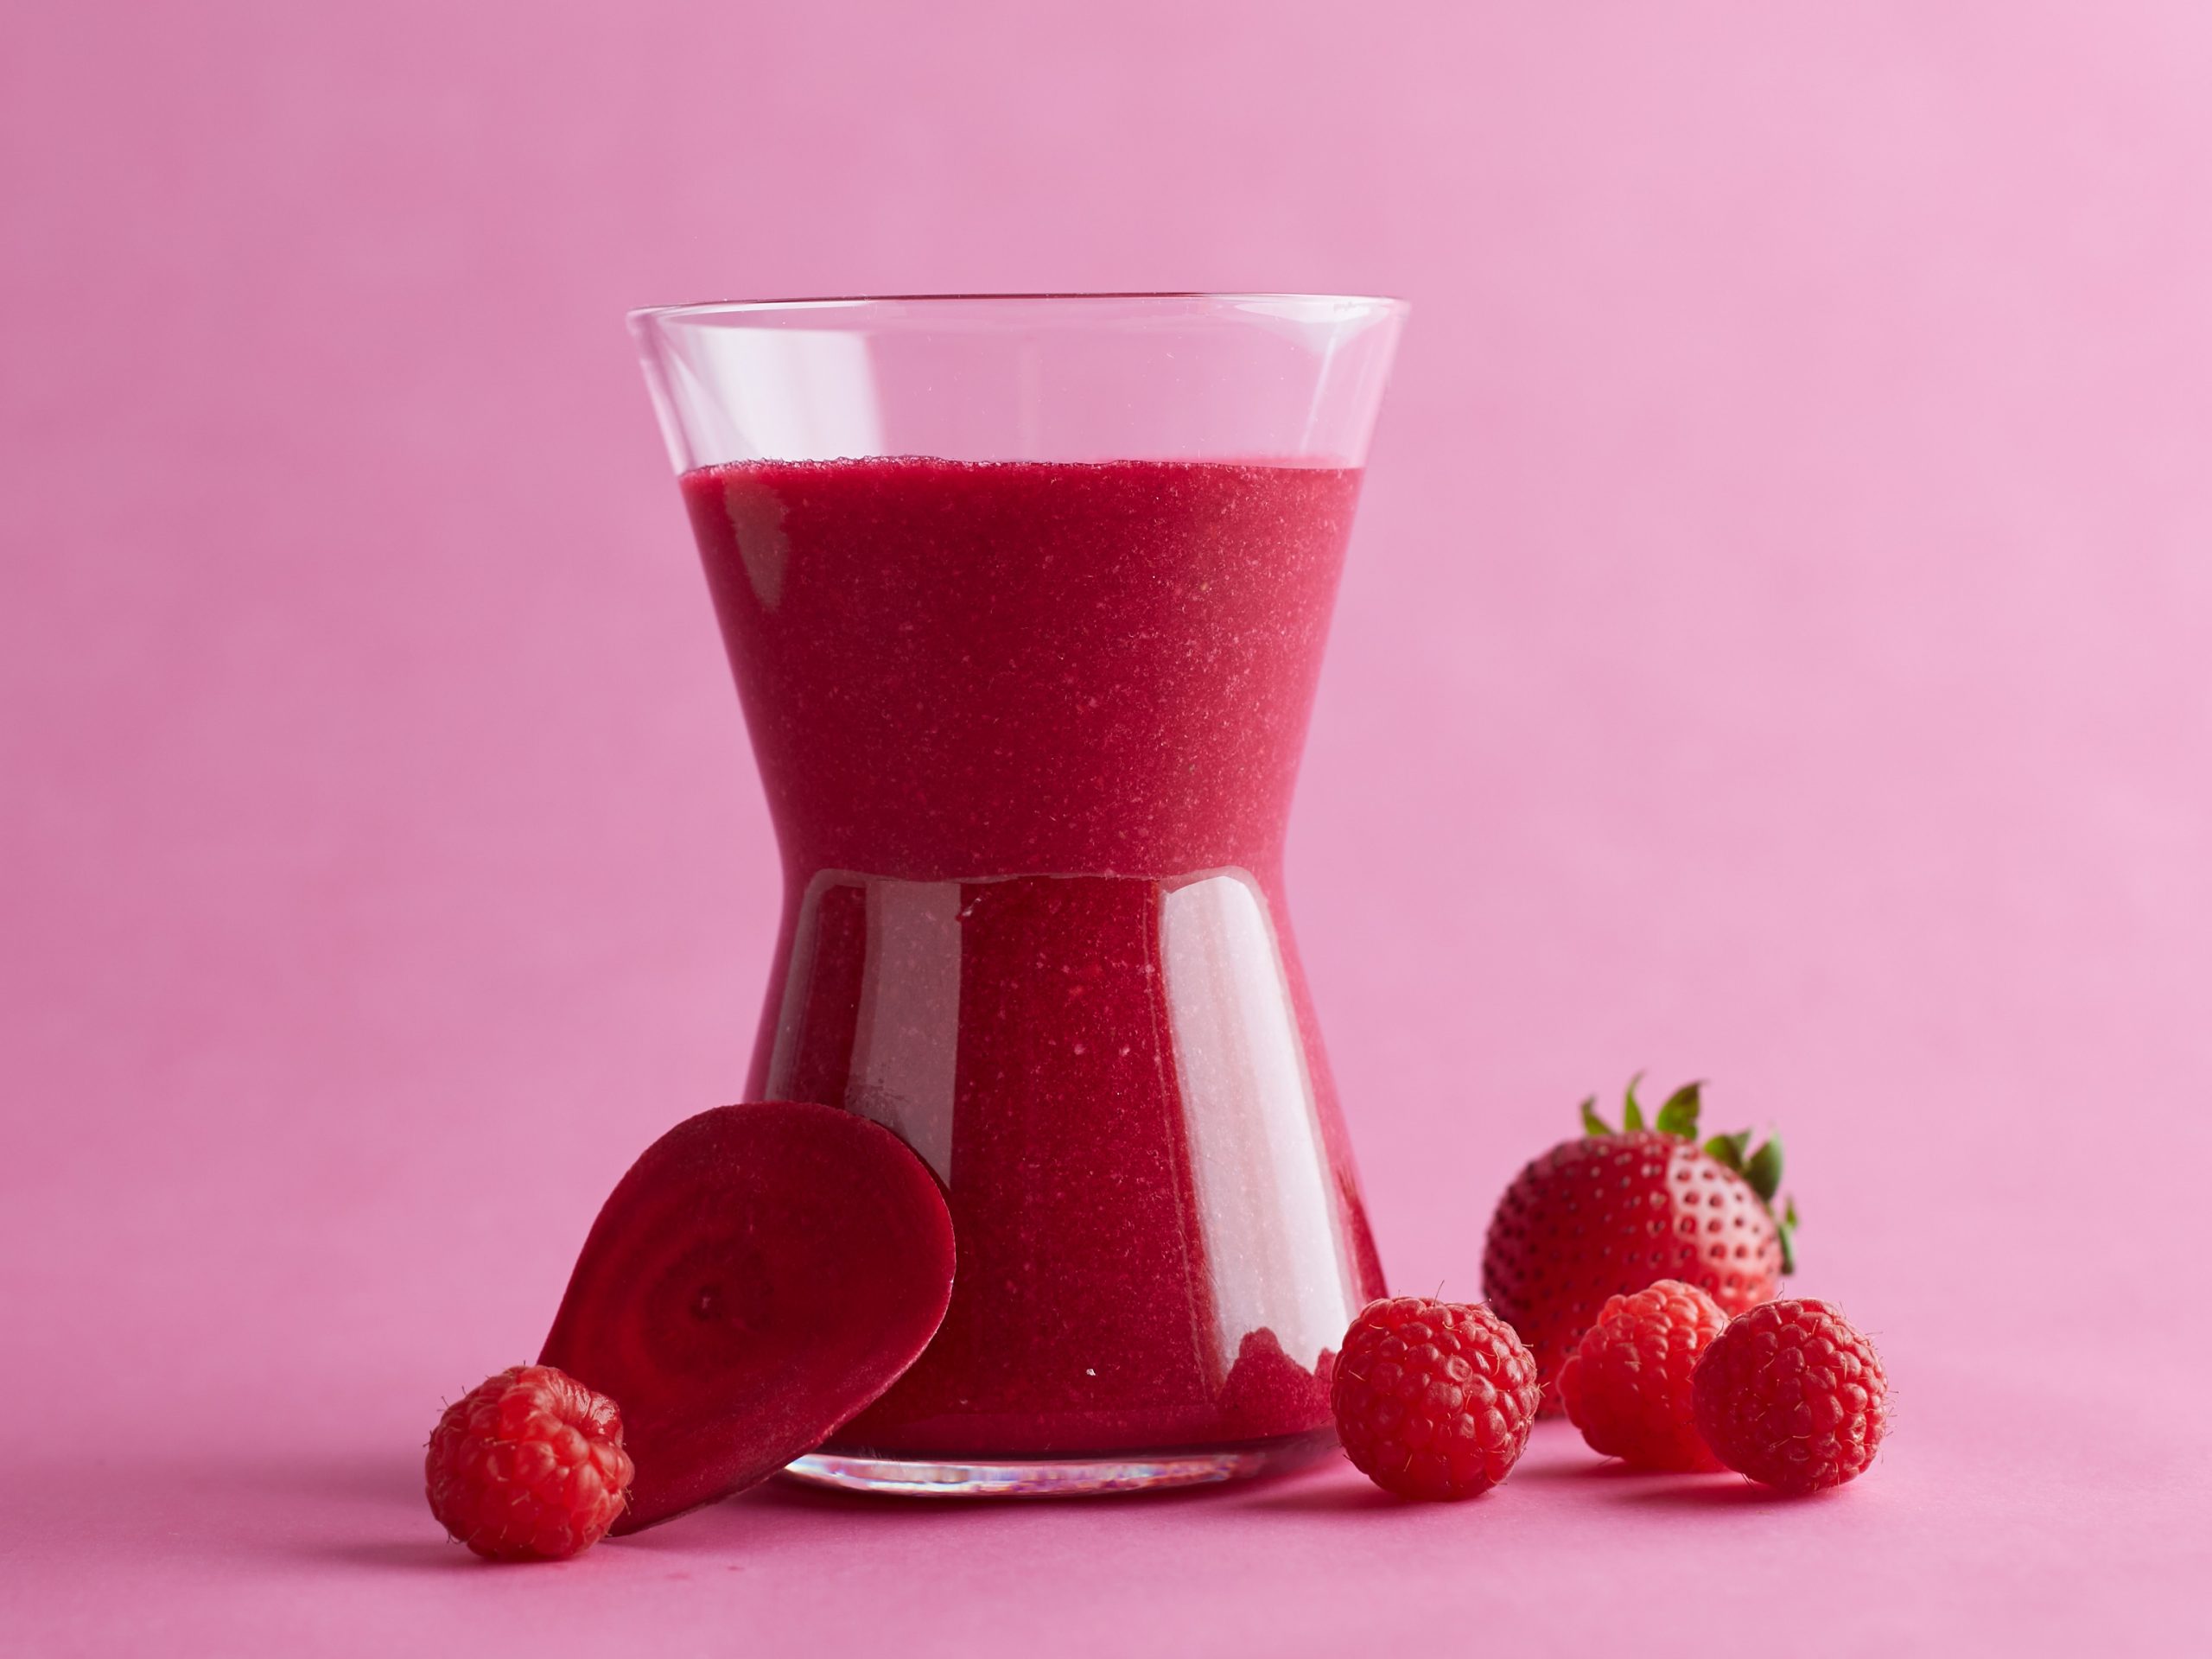 Food Network's Red Berry and Beet Smoothie